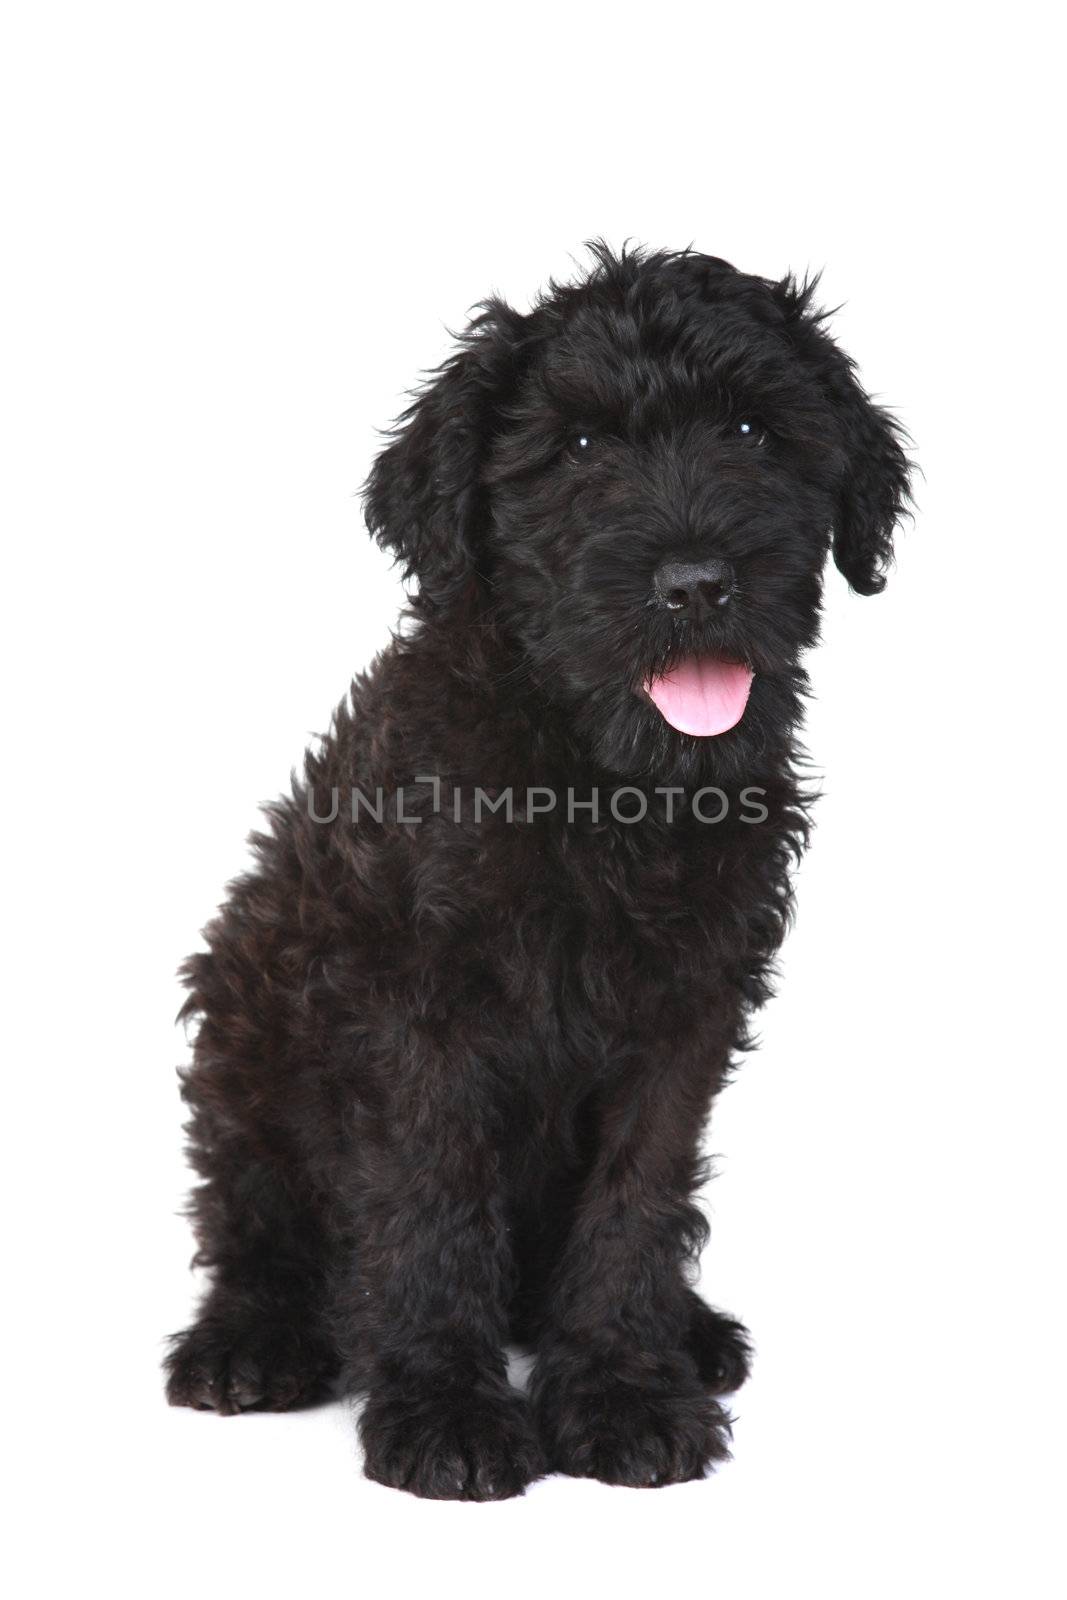 Cute Black Russian Terrier Puppy Dog on White Background by tobkatrina